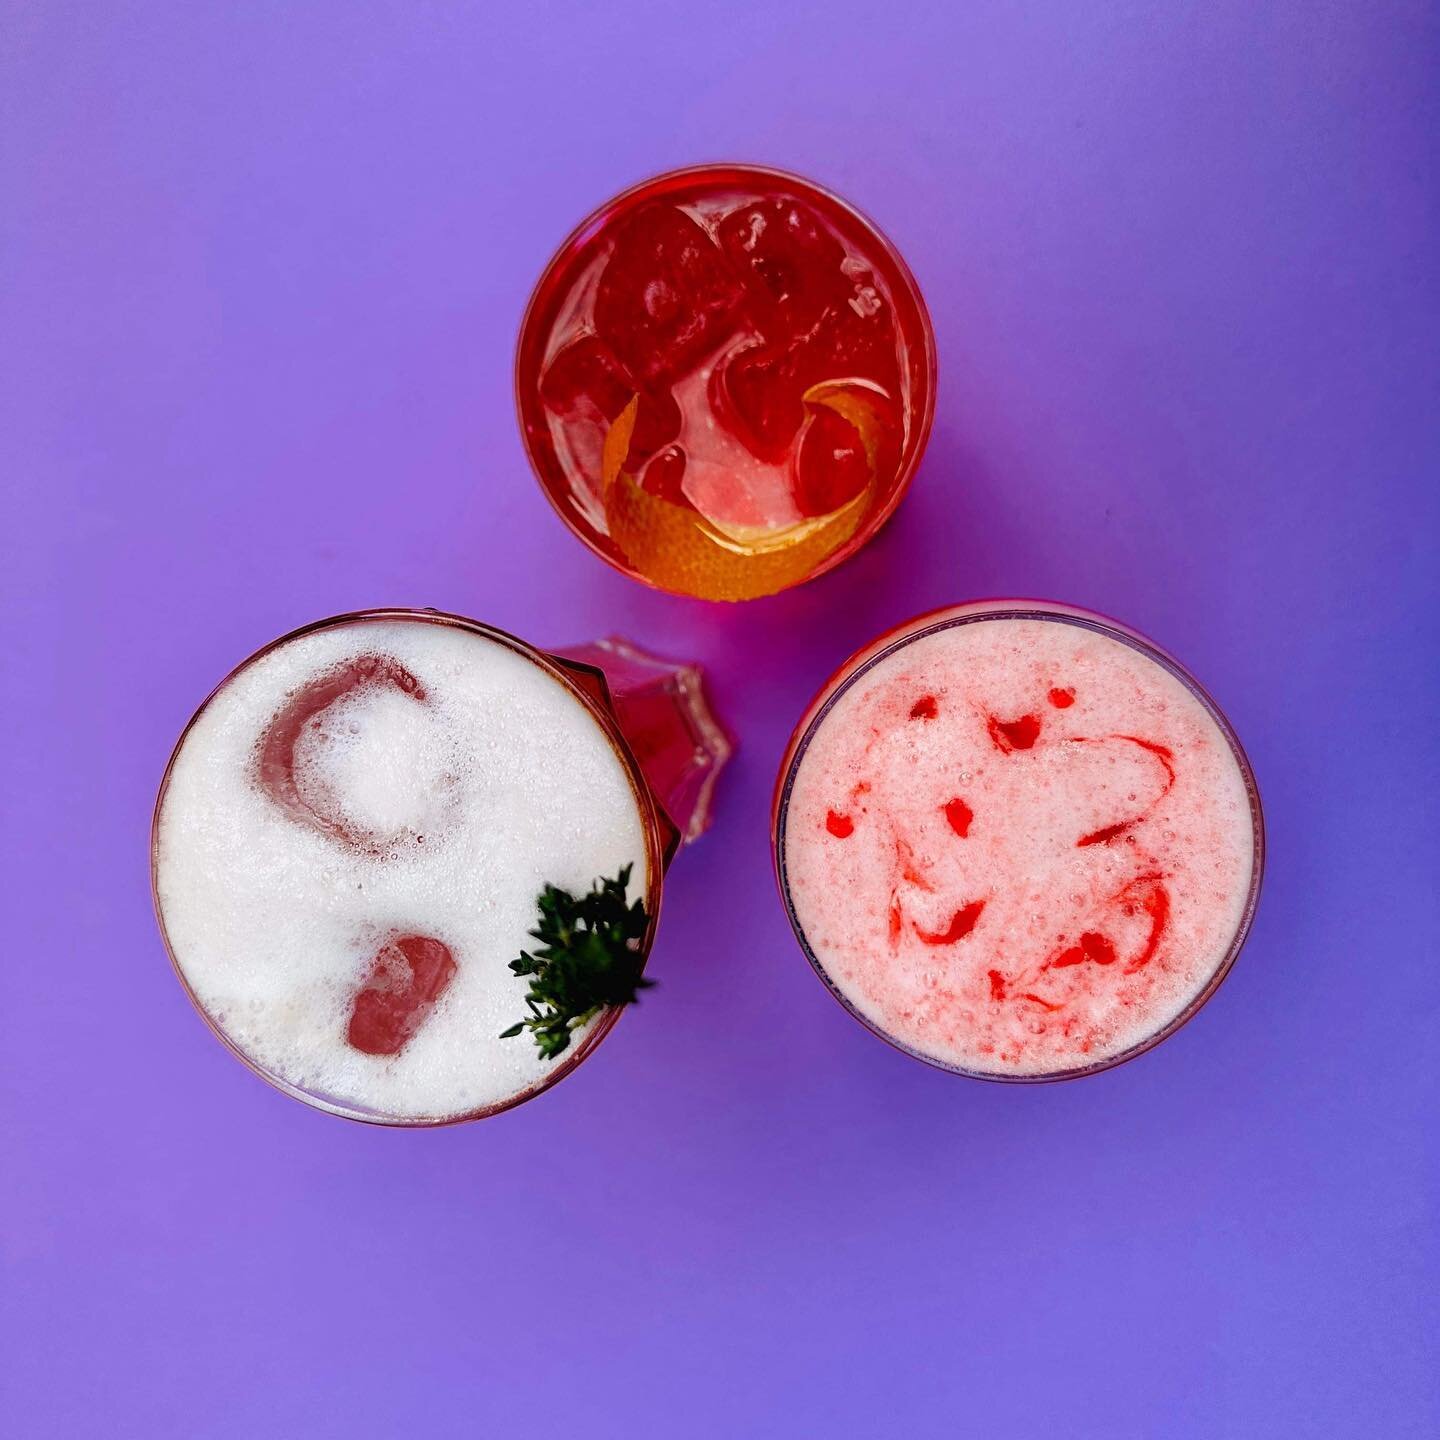 No matter how you&rsquo;re spending Mother&rsquo;s Day, just no that it could be 10 times better with our limited edition Mother&rsquo;s Day cocktails💃

We hope you&rsquo;re having a relaxing day with plenty of treats 😘

Much Love, Brutti 🧡💛